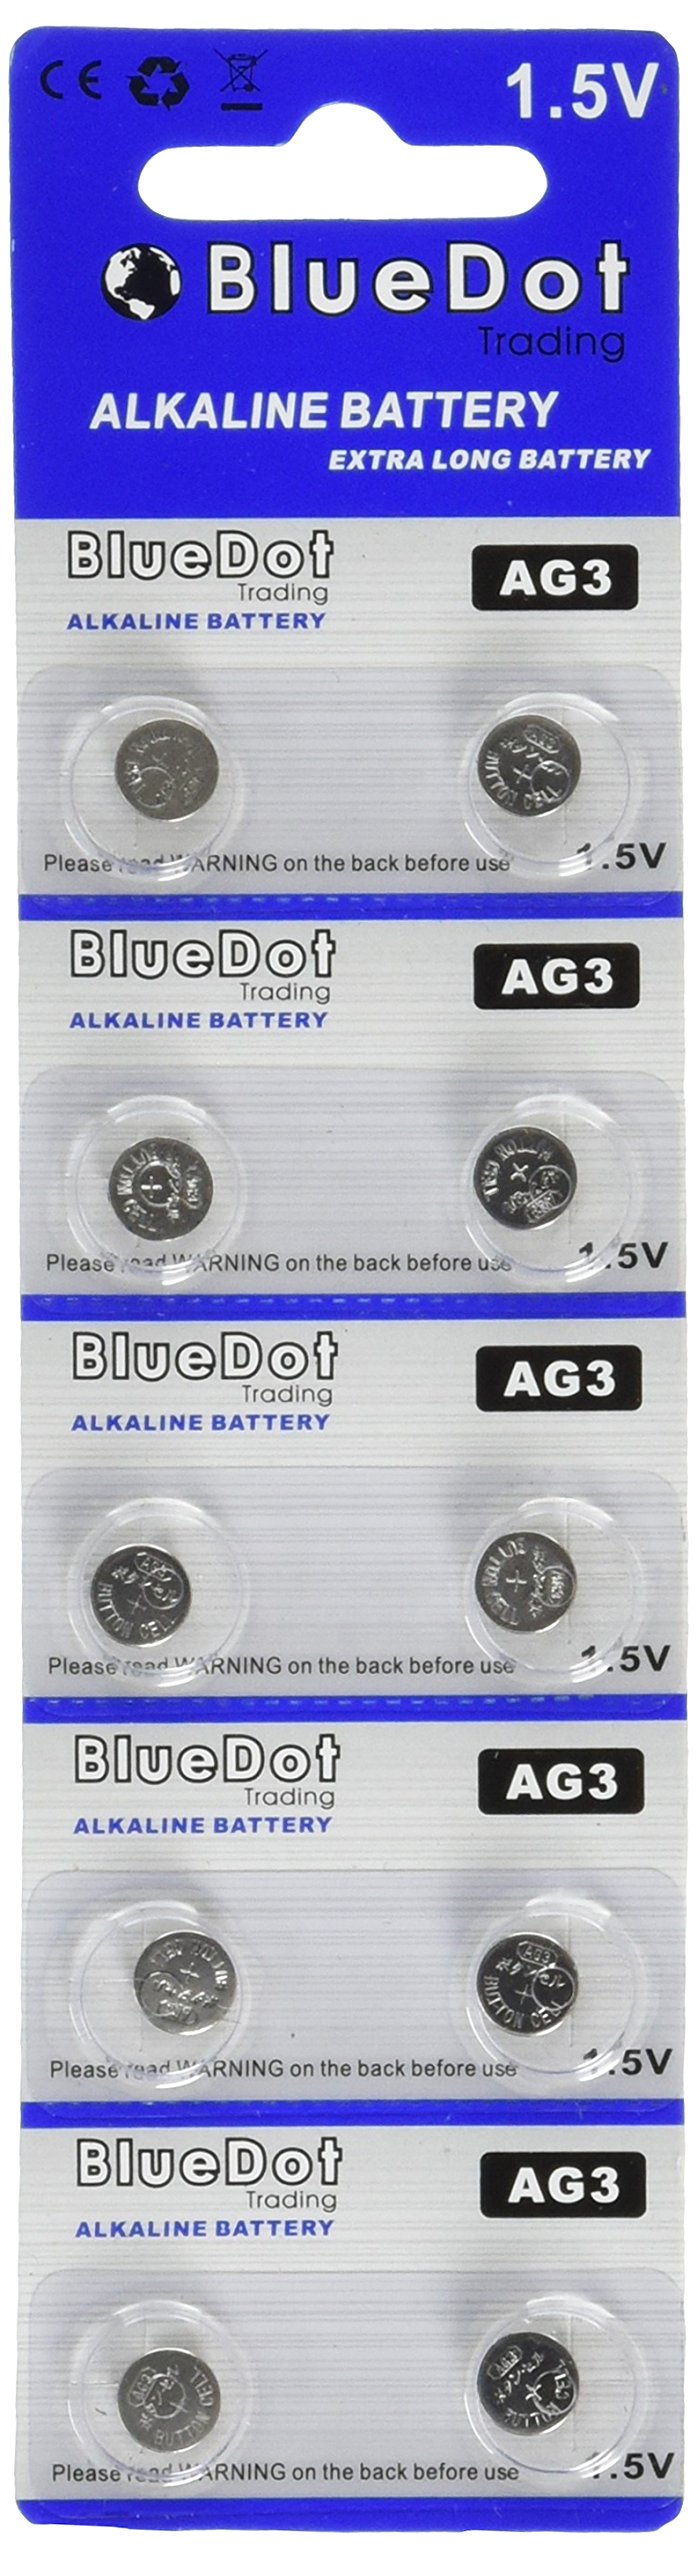 BlueDot Trading AG3 LR41 SR41 392 196 Alkaline Button Coin Cell 1.55v Battery for Watches, Calculators, Toys, Other Electronic Products, Quantity 10 Count